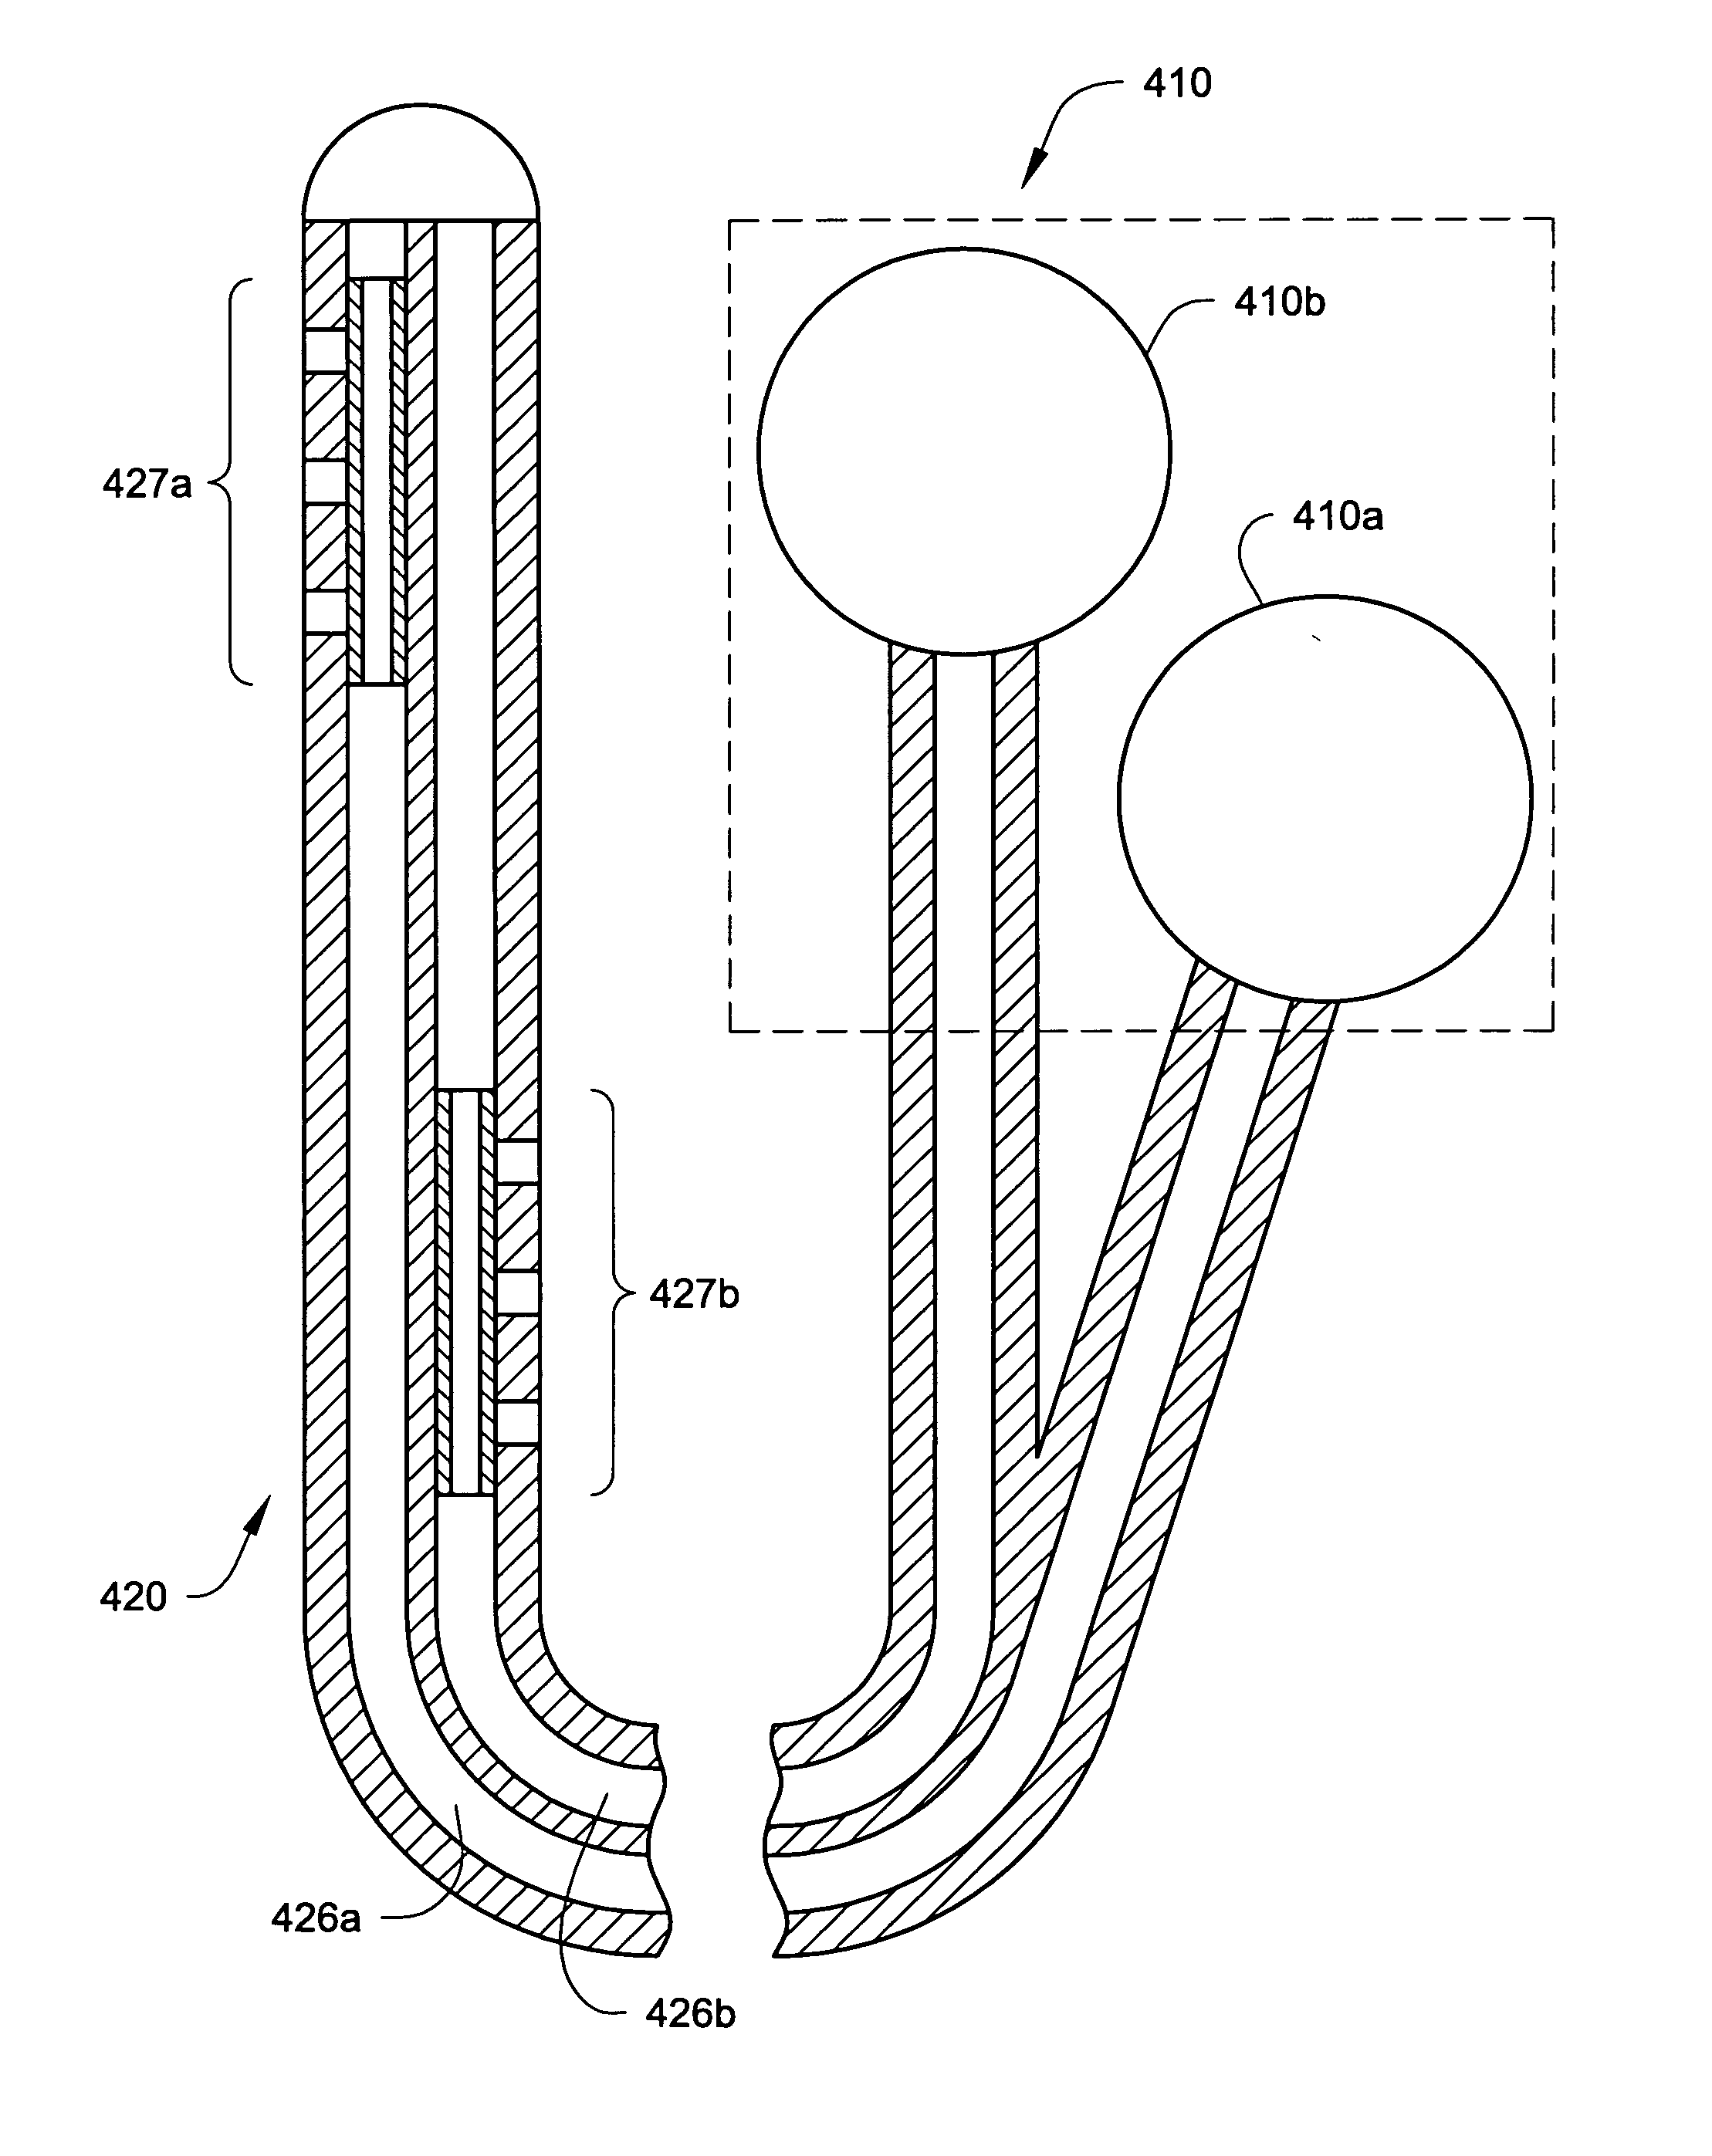 Catheters with tracking elements and permeable membranes